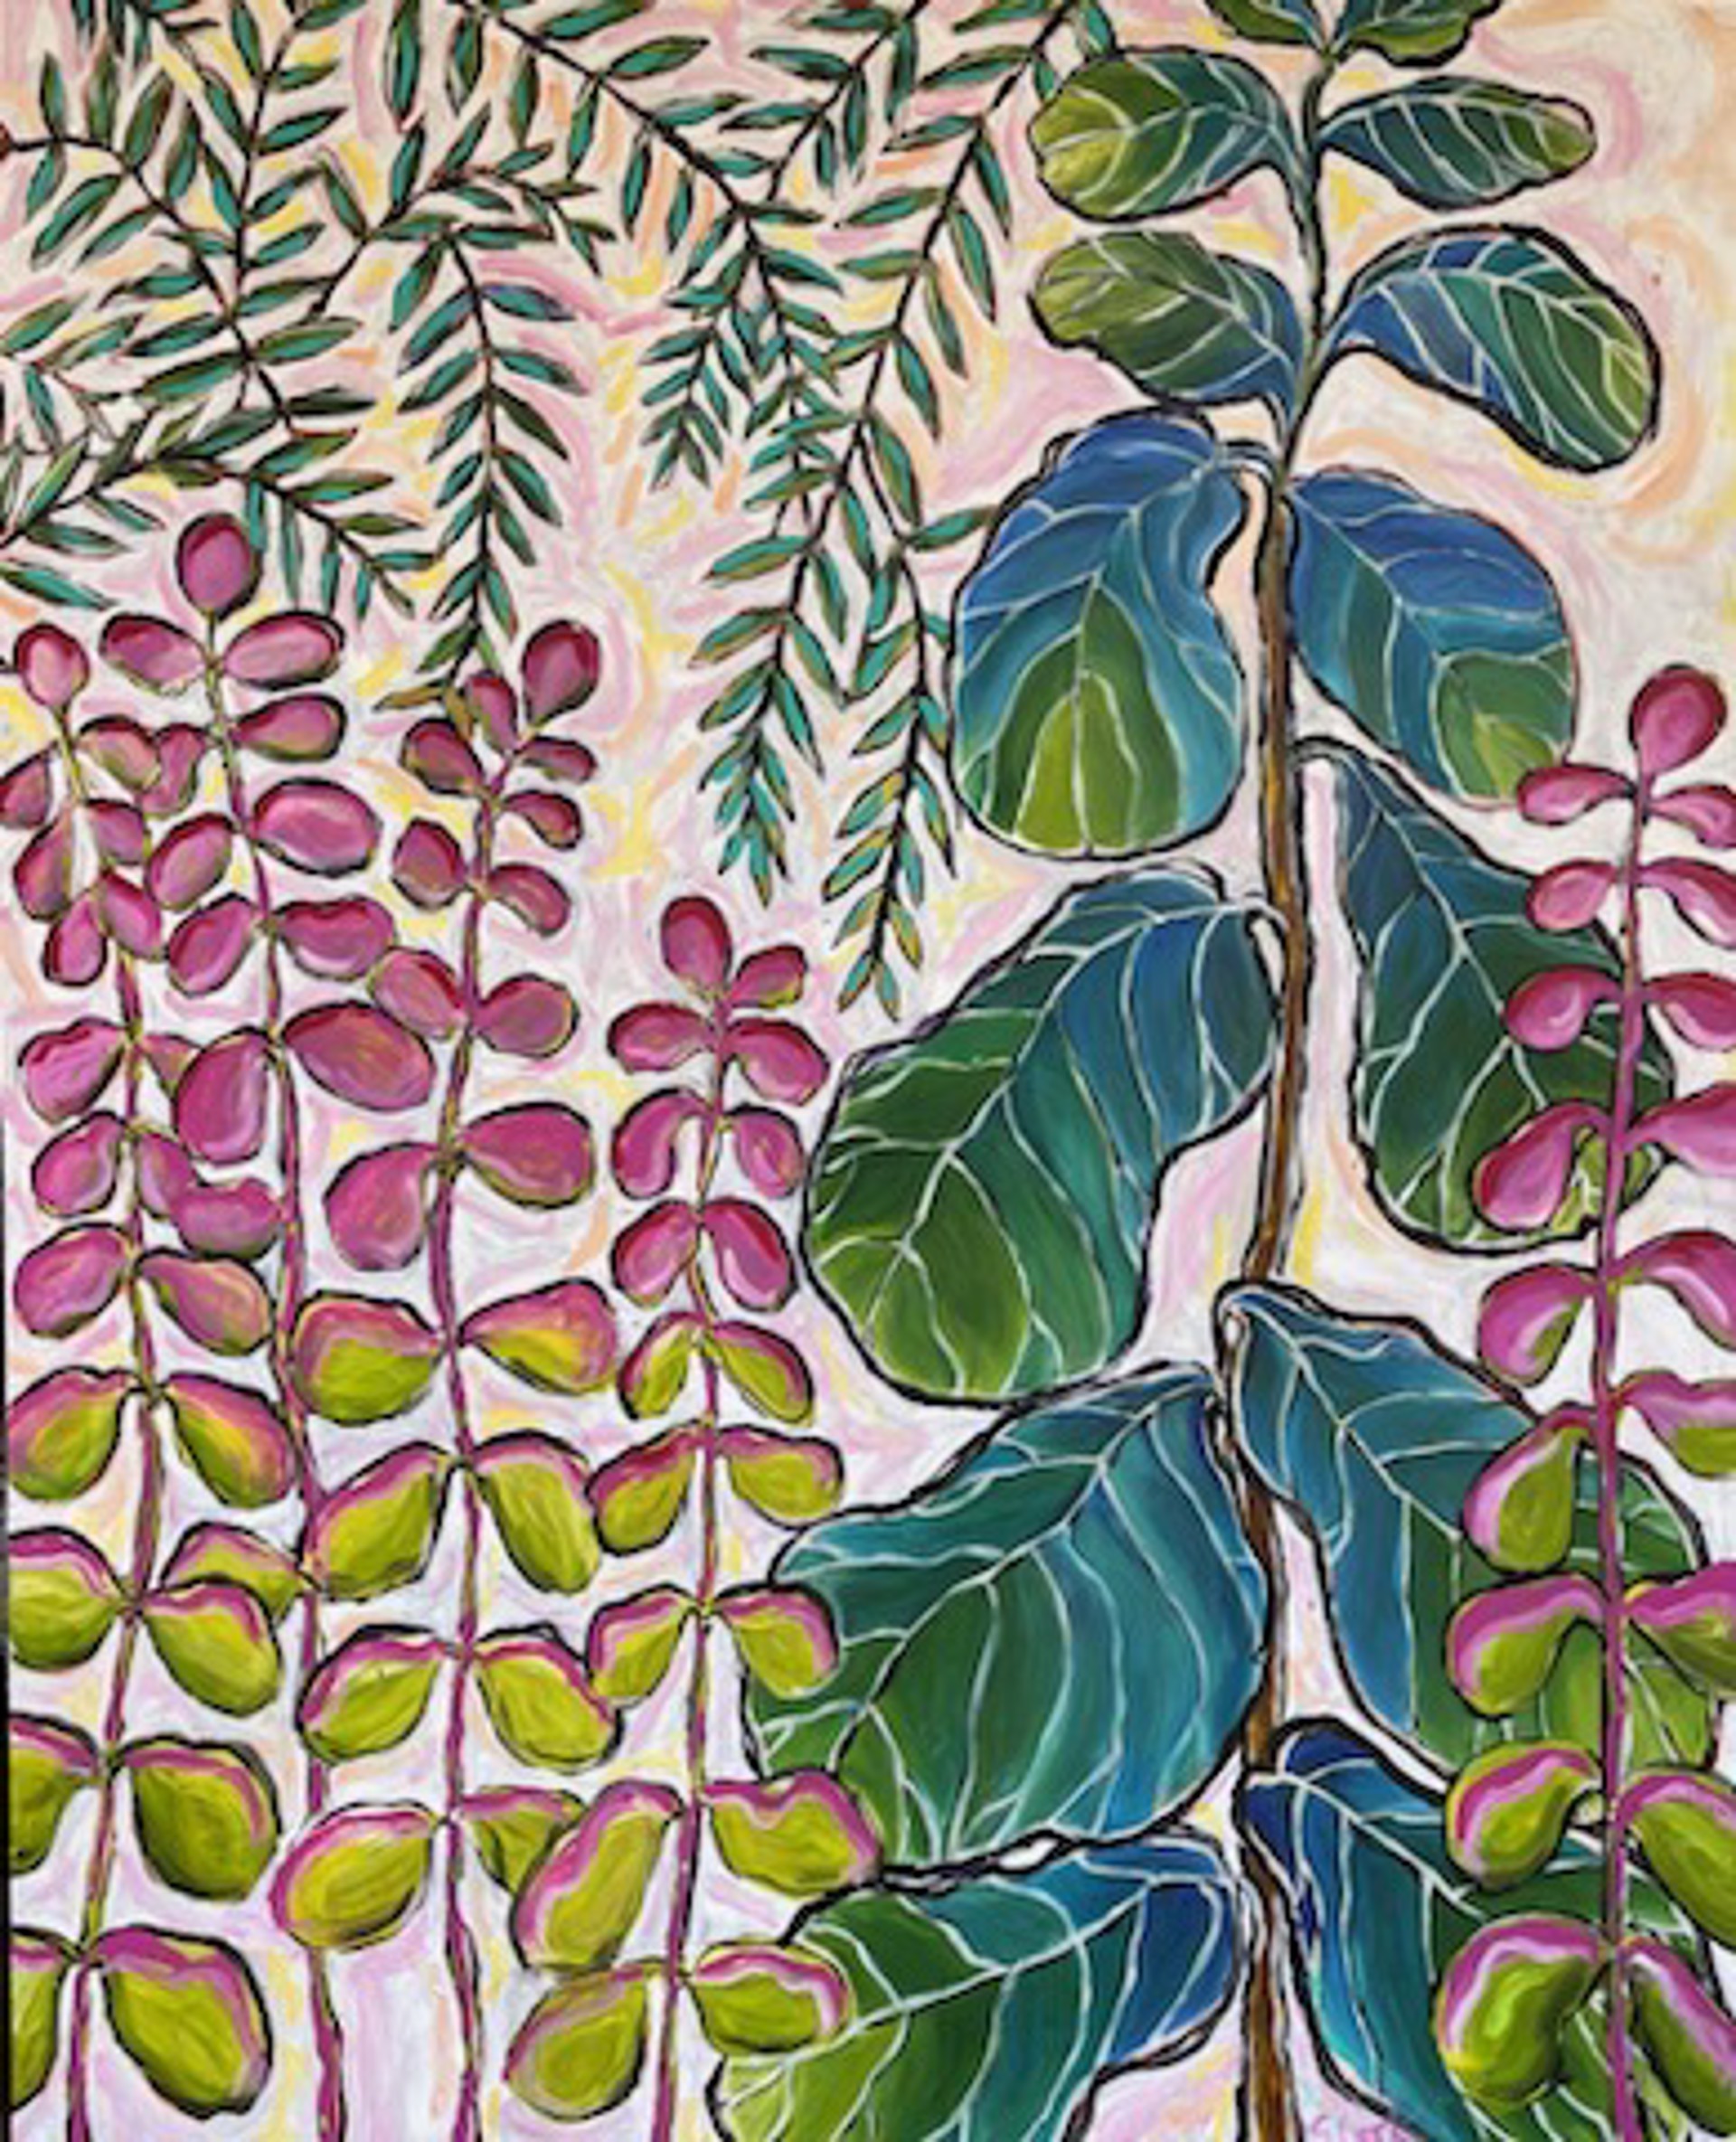 Plant Series I by Sherry Cook